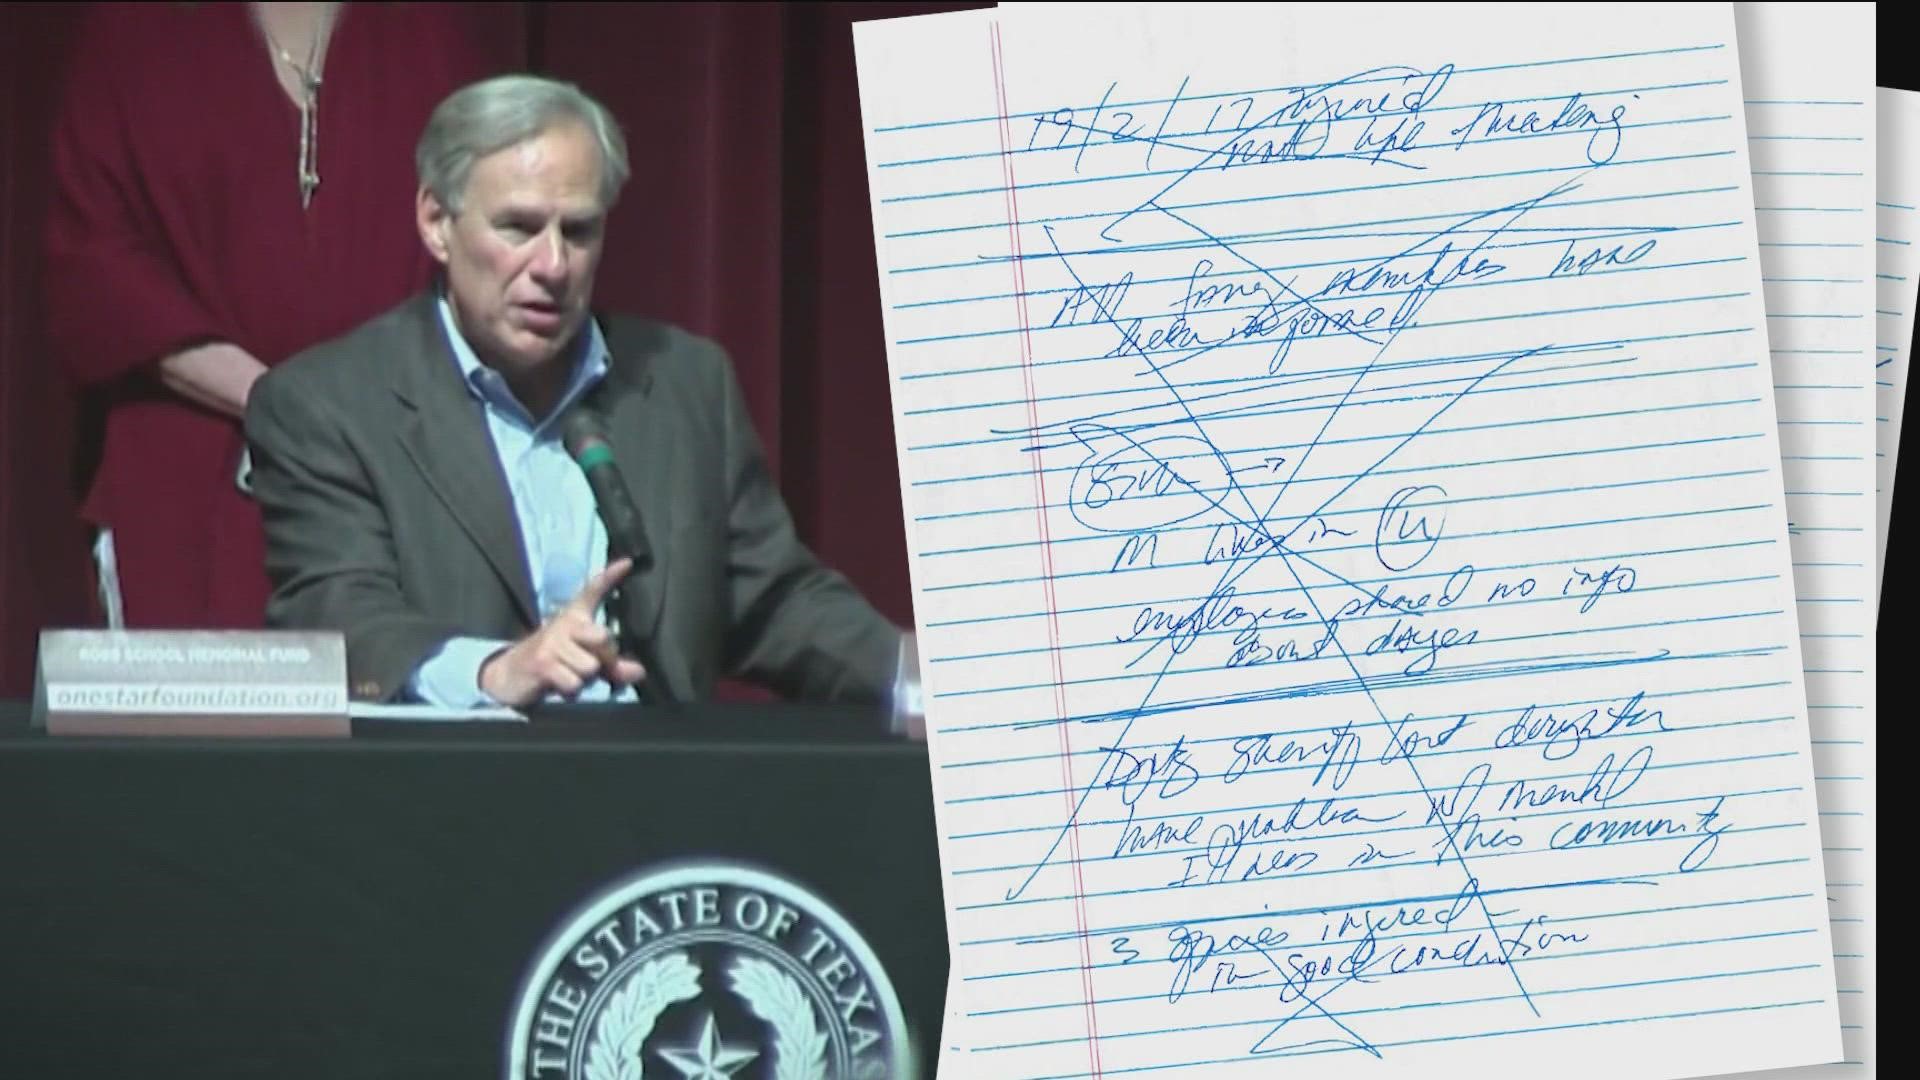 Gov. Greg Abbott's handwritten notes help paint a picture of how information has changed. Here's what we know.